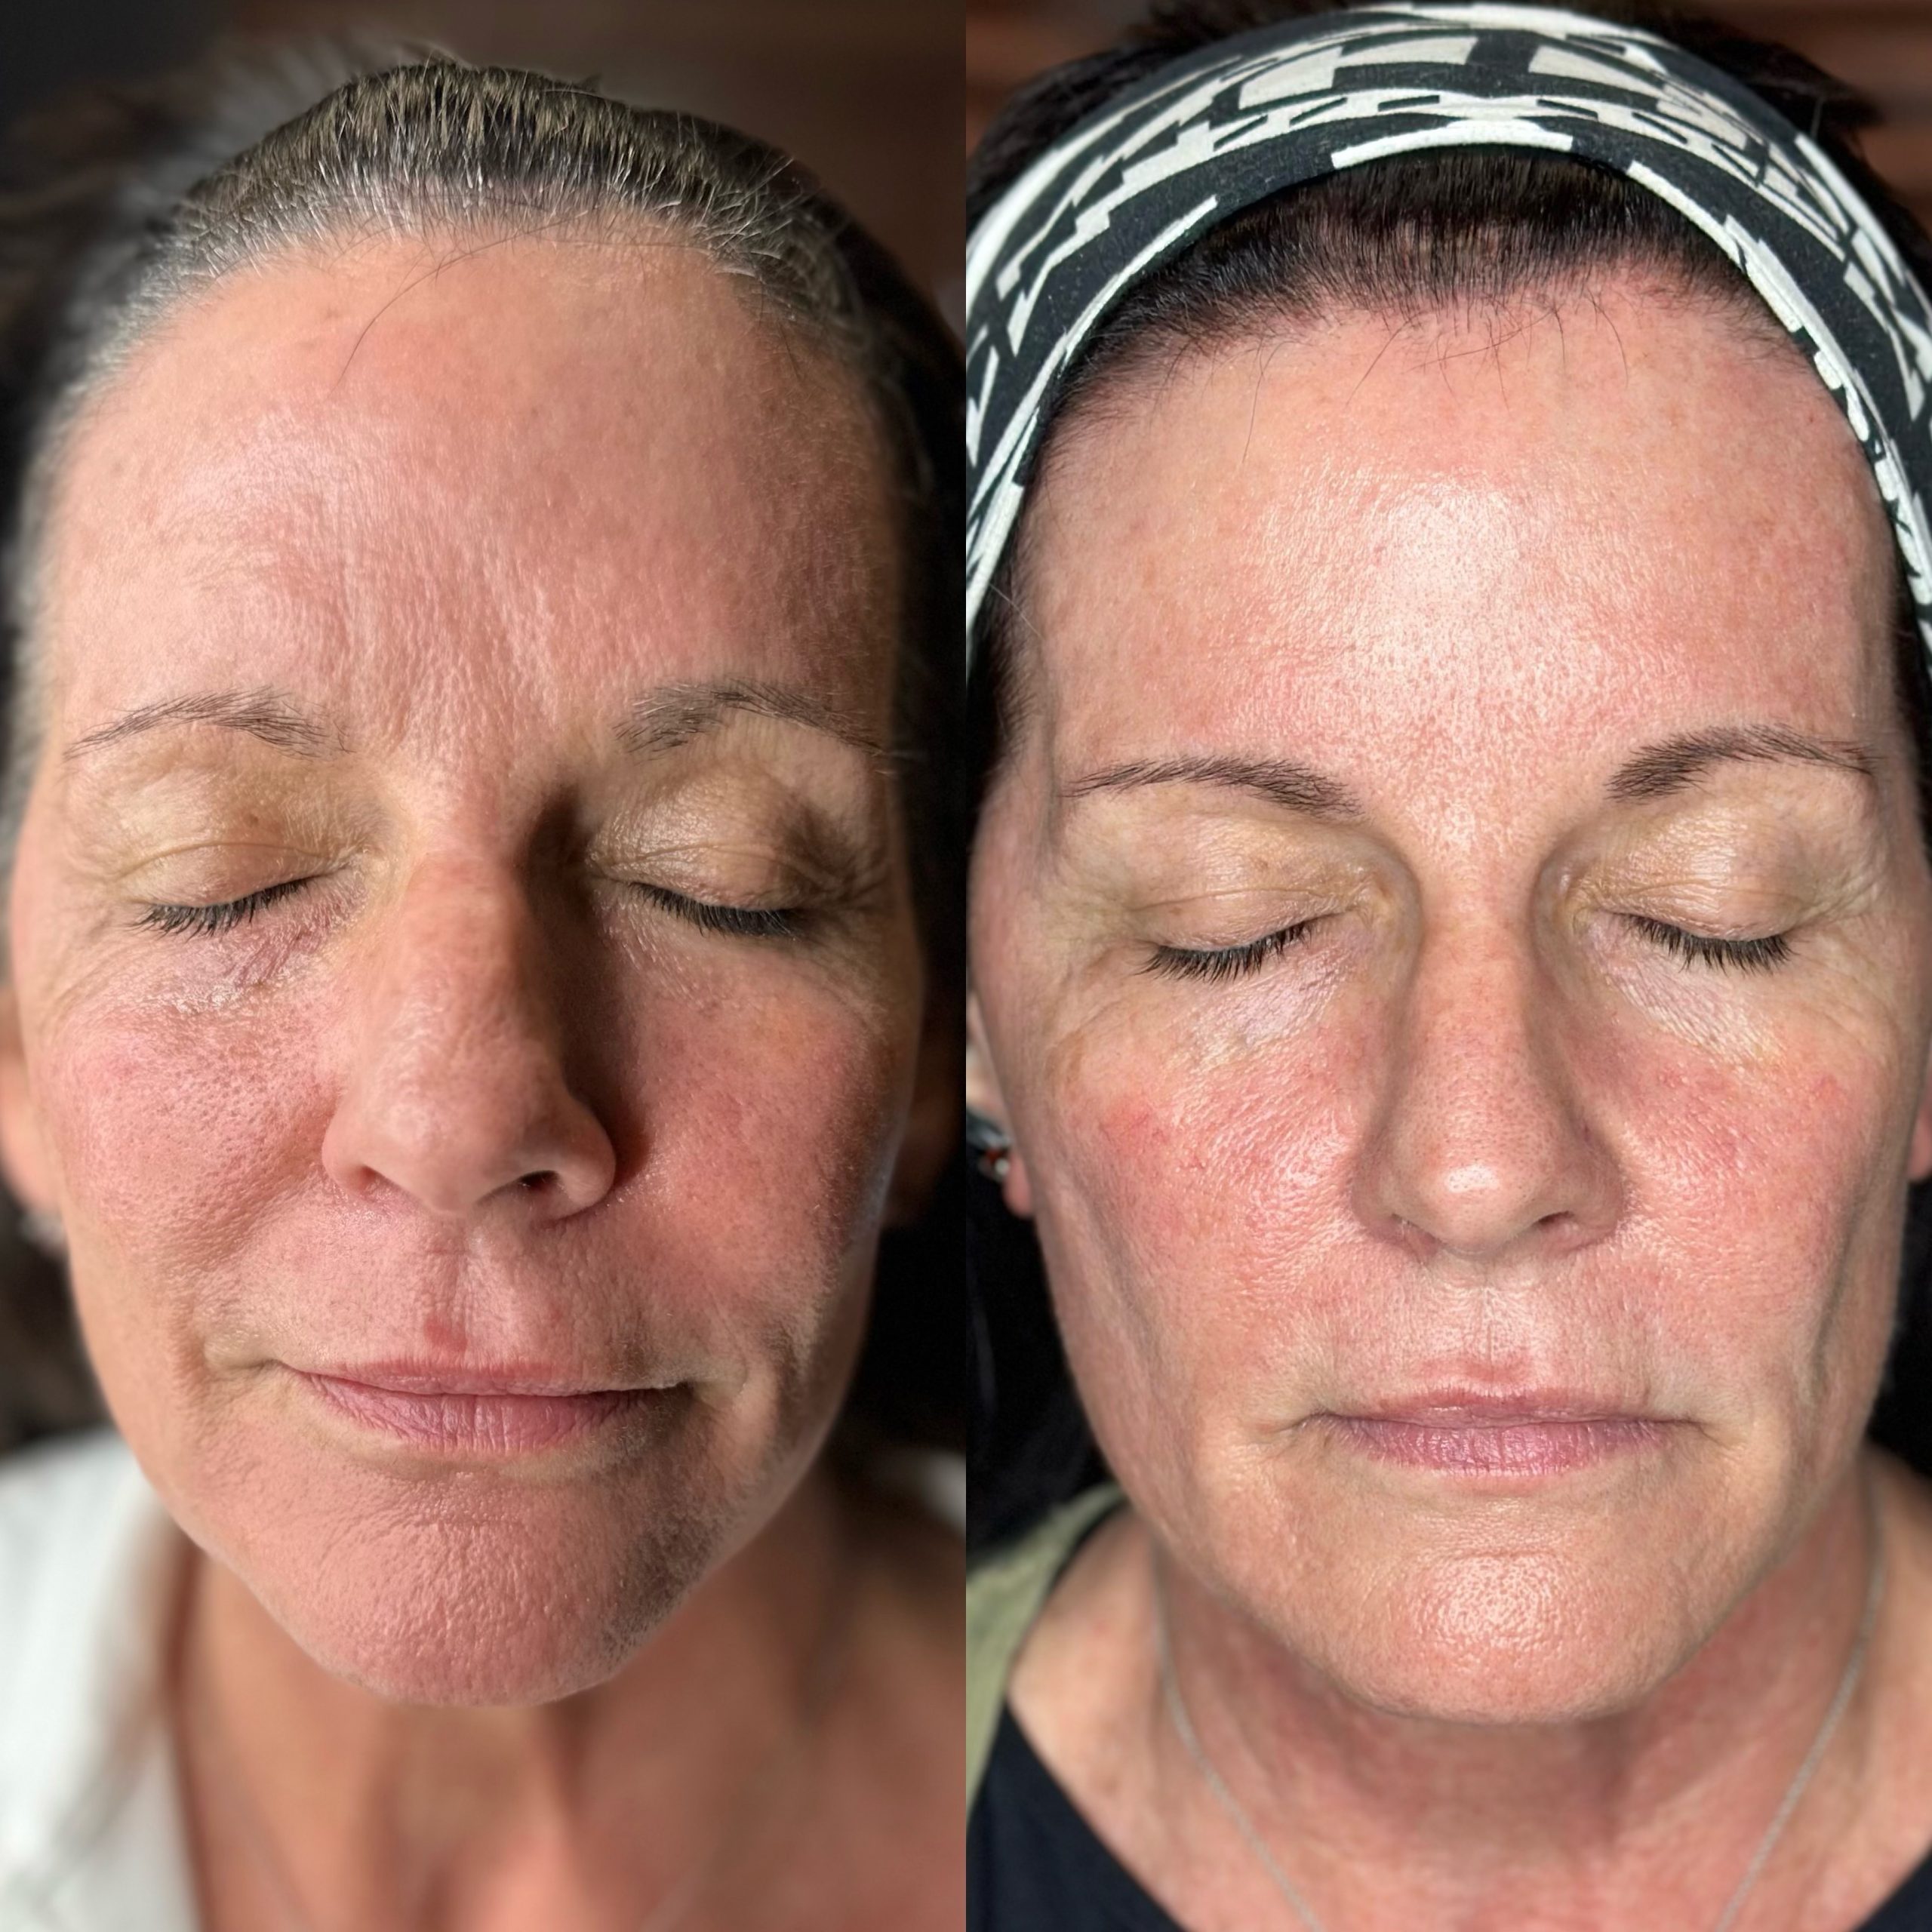 Morpheus8 patient, Tracy Atwood before and after